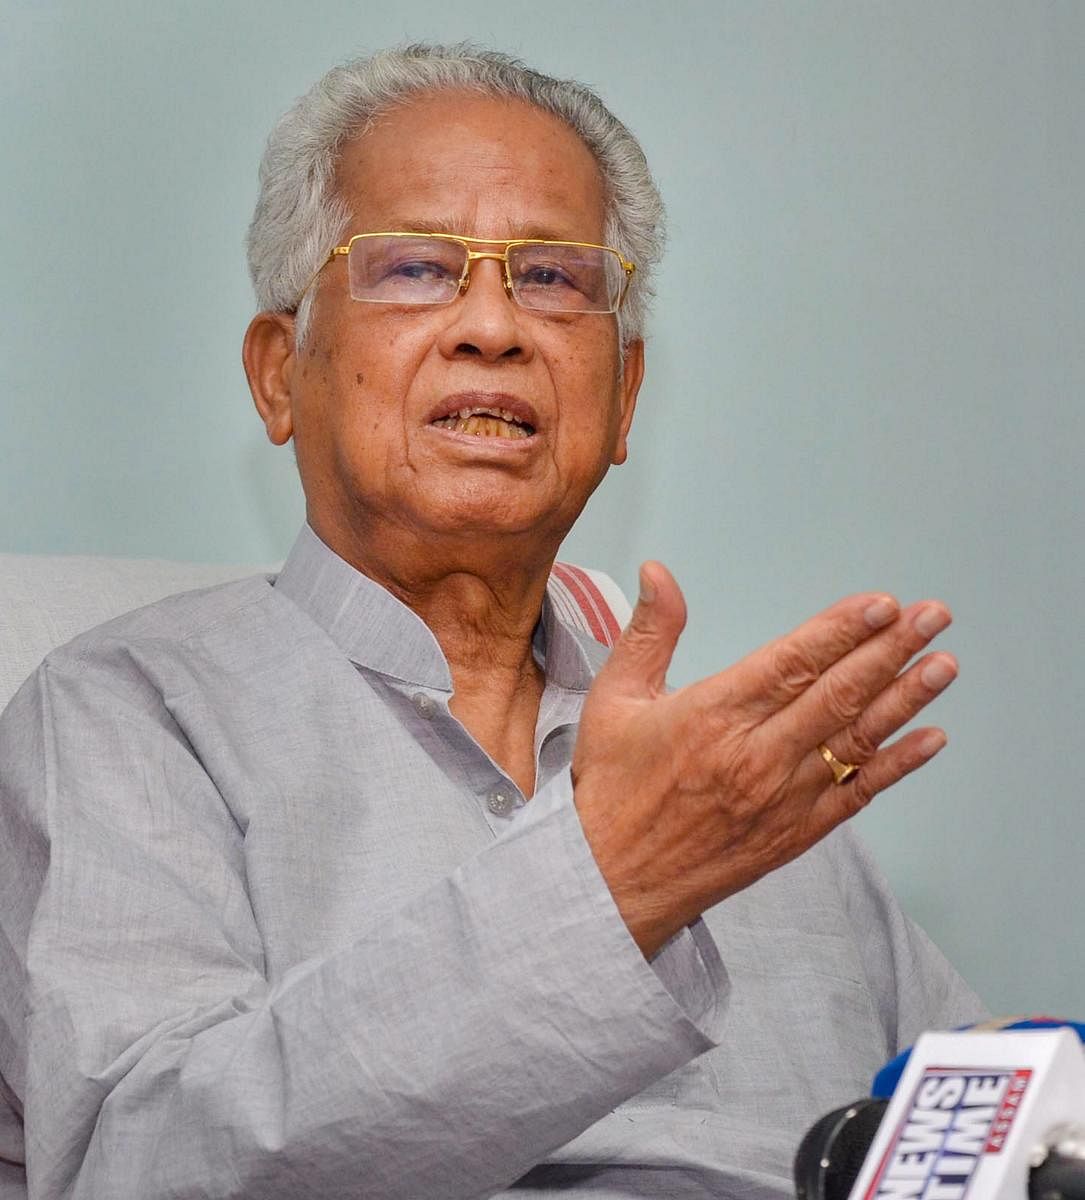 Guwahati: Former Assam chief minister Tarun Gogoi addresses a press conference regarding the National Register of Citizens (NRC), at New MLA hostel in Guwahati on Tuesday, July 31, 2018. The Final draft of state's National Register of Citizens was release